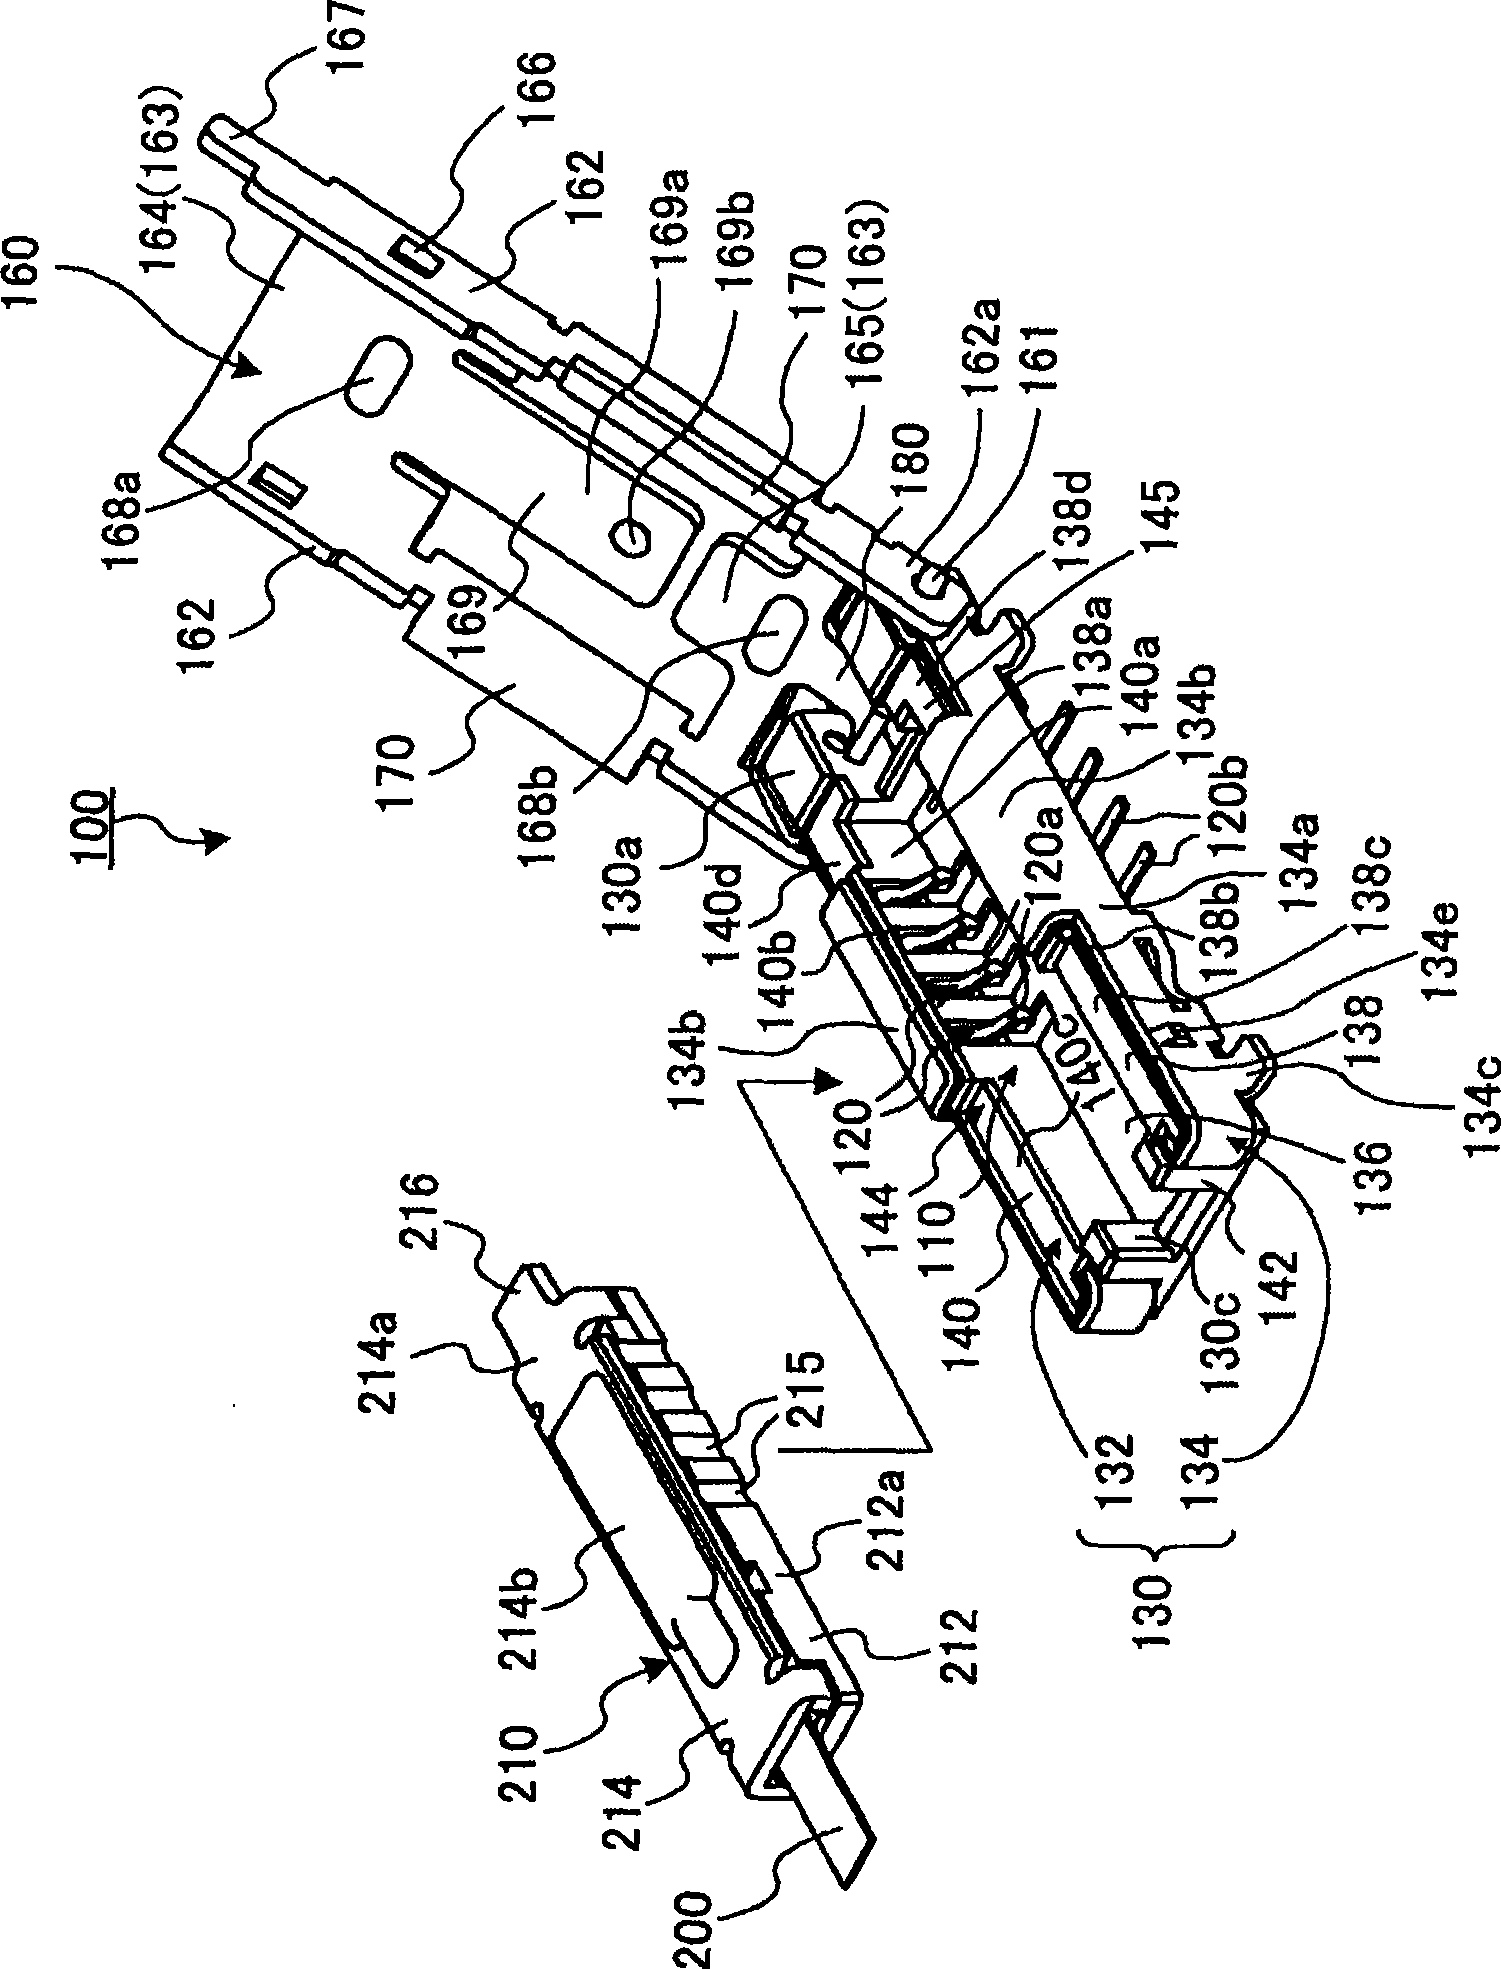 Connector for connecting electronic component